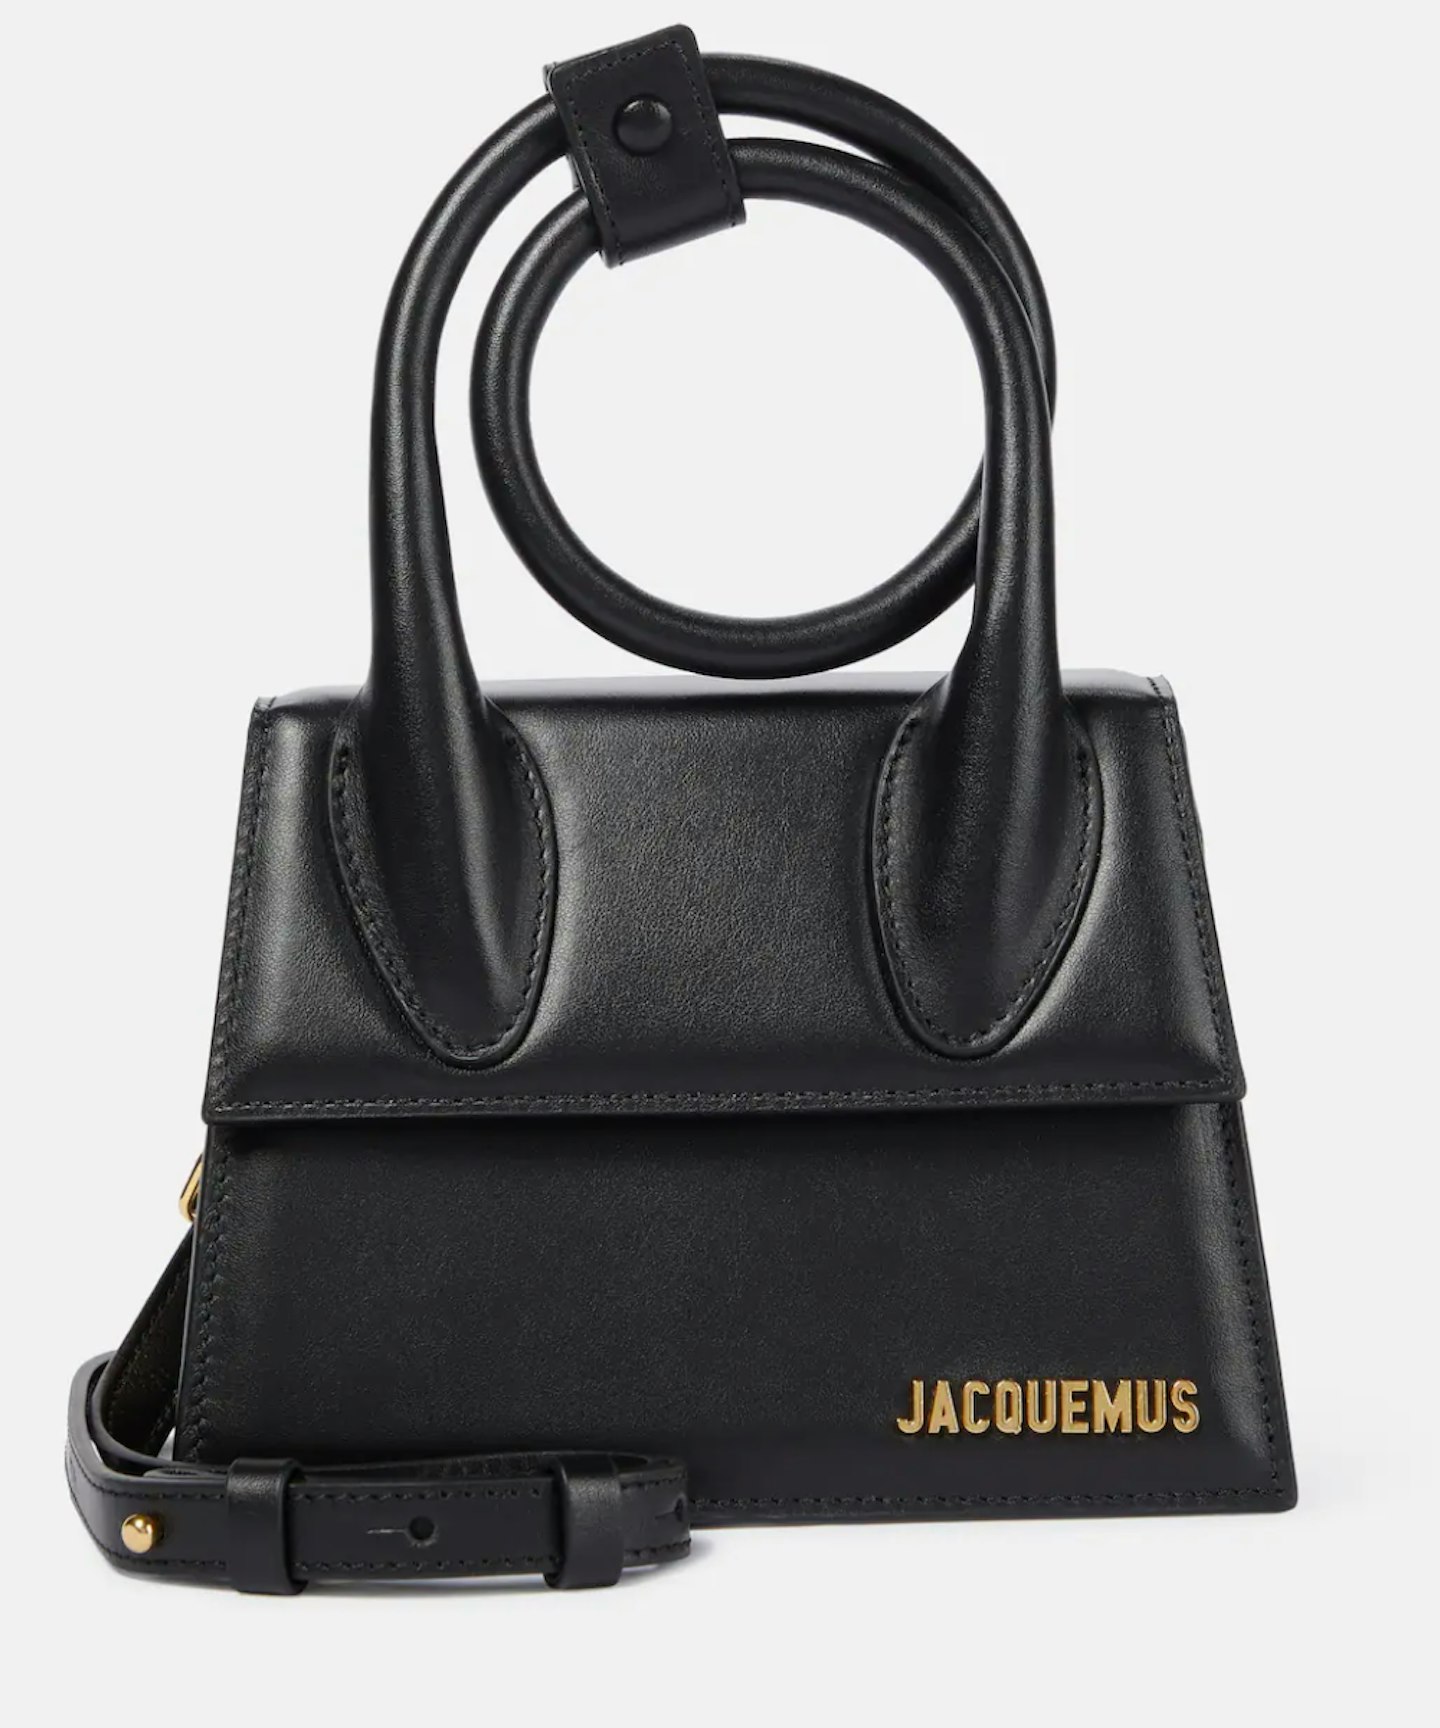 JACQUEMUS Le Chiquito Noeud Leather Tote